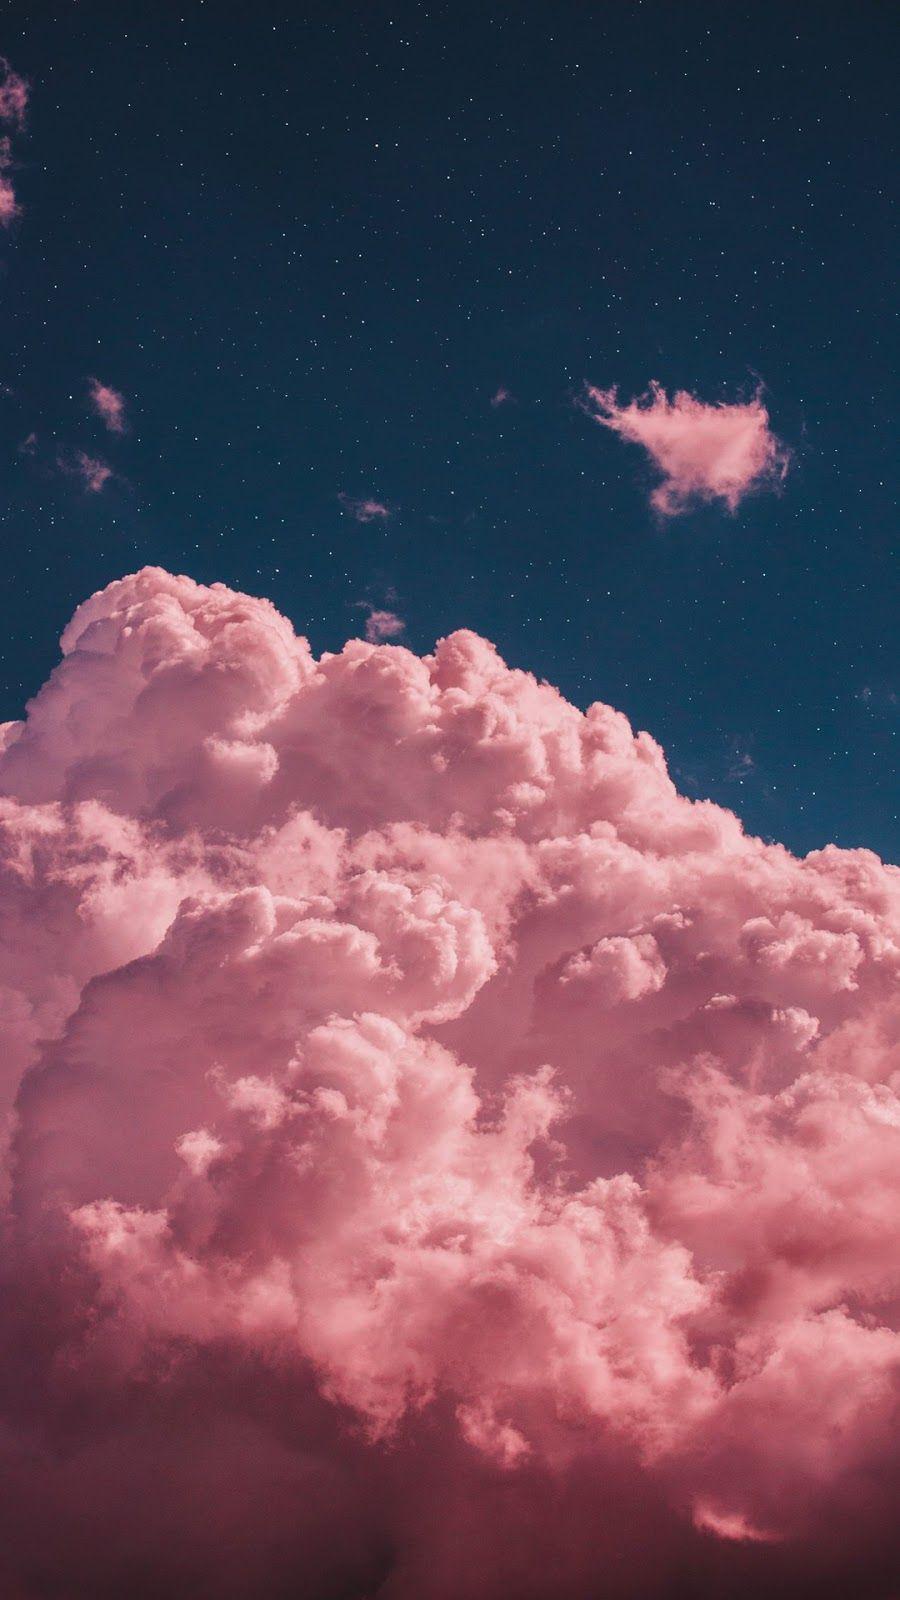 A pink cloud in the sky at night - Cloud